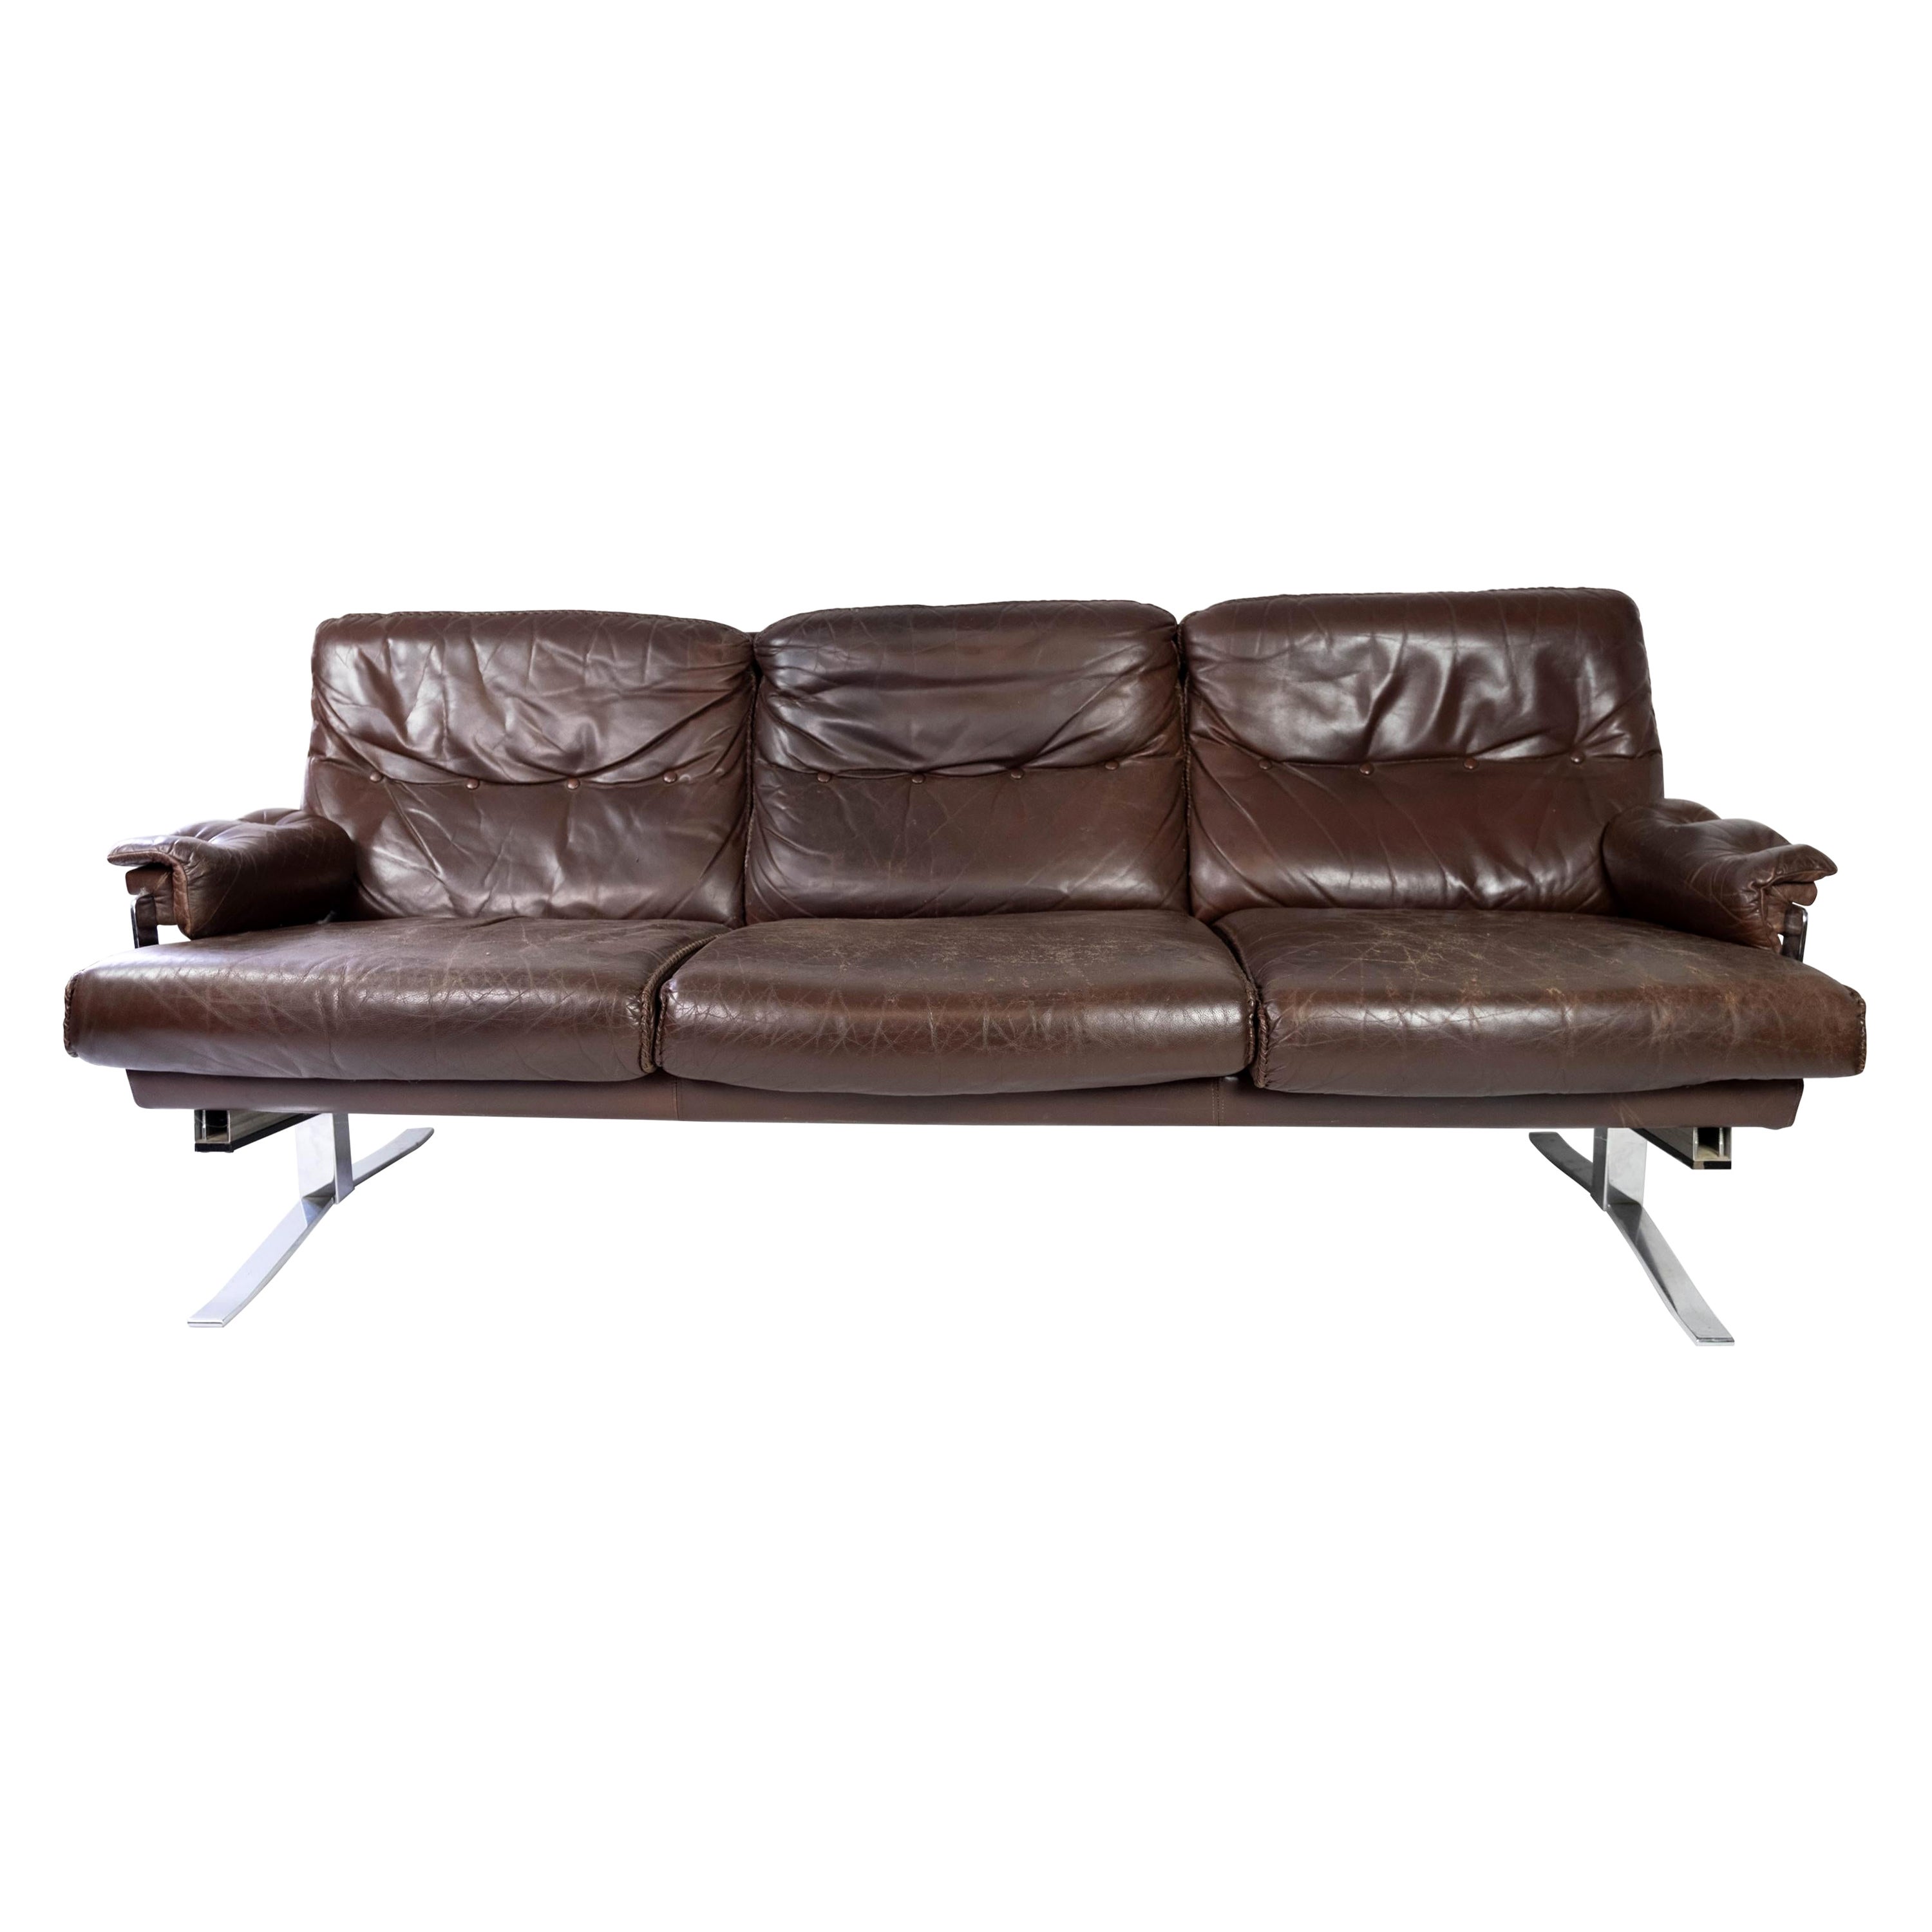 3. Seater Sofa Made In Patinated Brown Leather By Arne Norell From 1970s